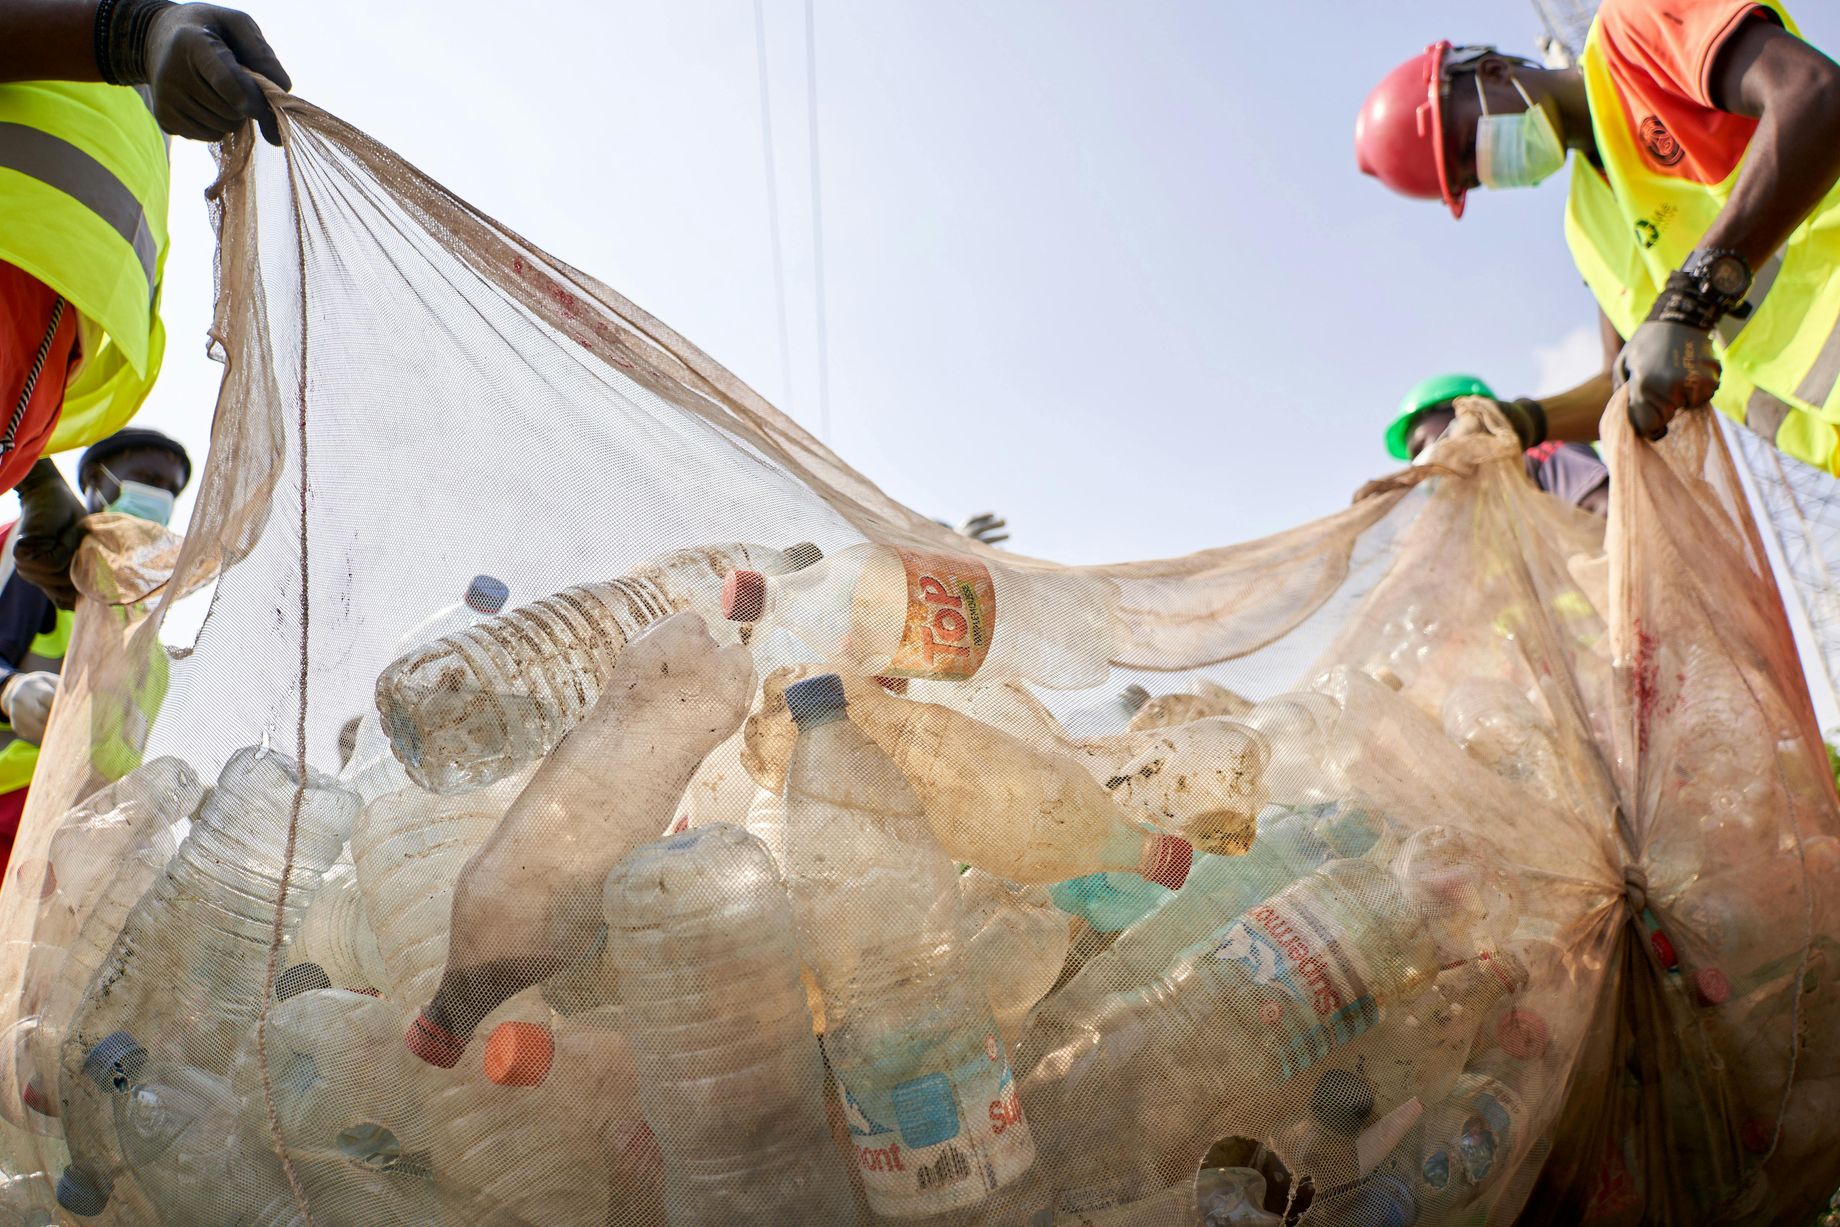 Low Angle Shot of People Holding a Garbage Bag Full of Plastic Bottles